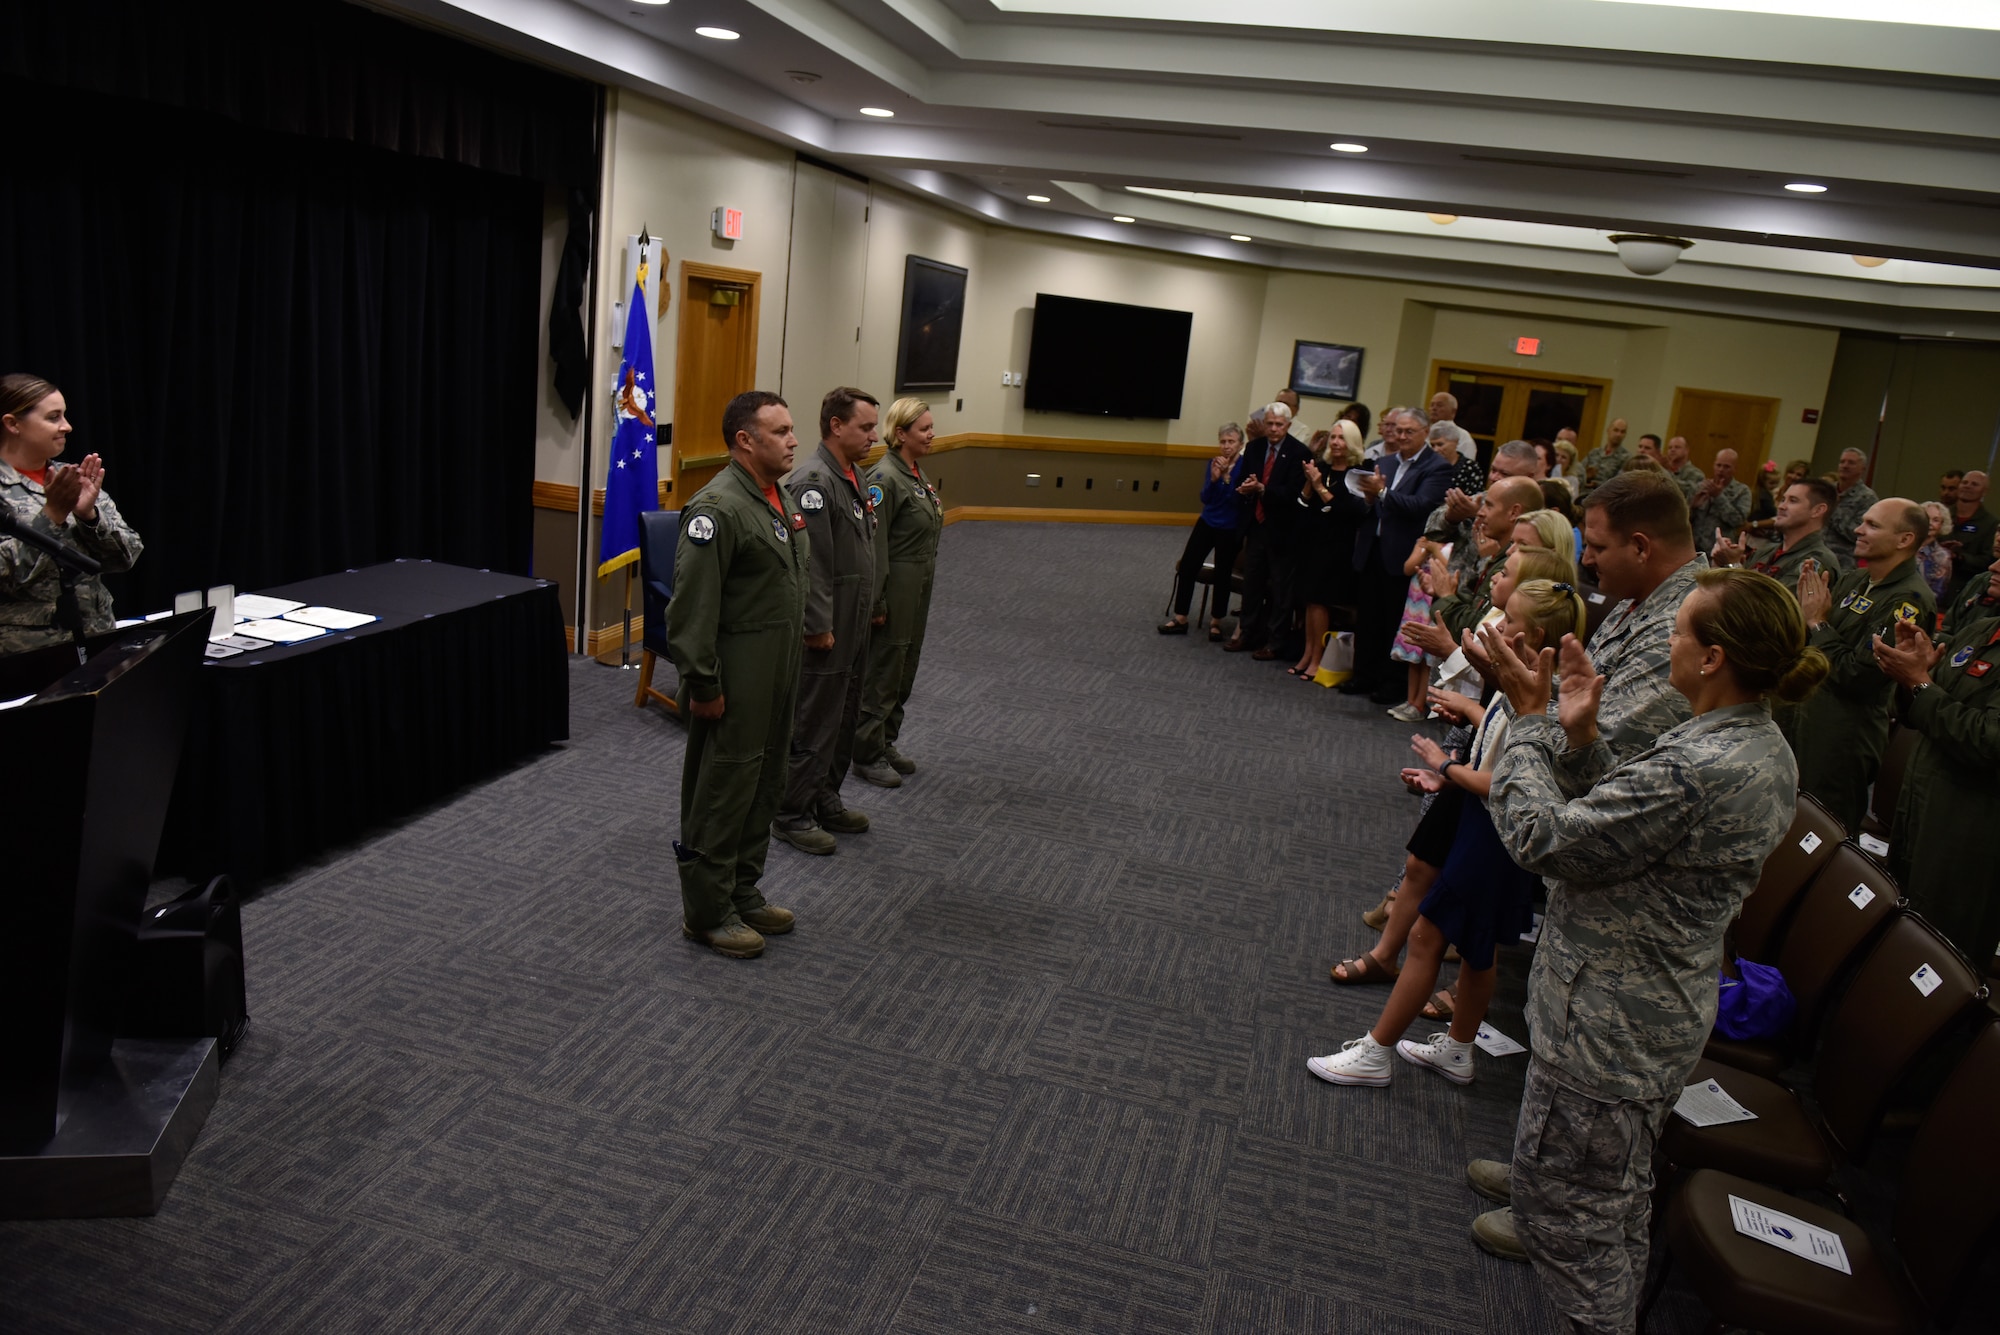 From left, U.S. Air Force Col. Jared Kennish stands next to Lt. Cols. John and Jennifer Avery during their joint retirement from the Missouri Air National Guard, Sept 7, 2018, at Whiteman Air Force Base, Missouri. The Averys married on Feb. 5, 2005, becoming the first husband and wife team to fly the B-2 Stealth bomber. At their official retirement September ceremony at Whiteman AFB, standing in front of their families and closest friends, John and Jennifer were presented medals for outstanding military service and certificates of appreciations from the president of the United States before the reading of the orders declaring they were “relieved from duty and retired.” (U.S. Air Force photo by Tech. Sgt. Alexander W. Riedel)